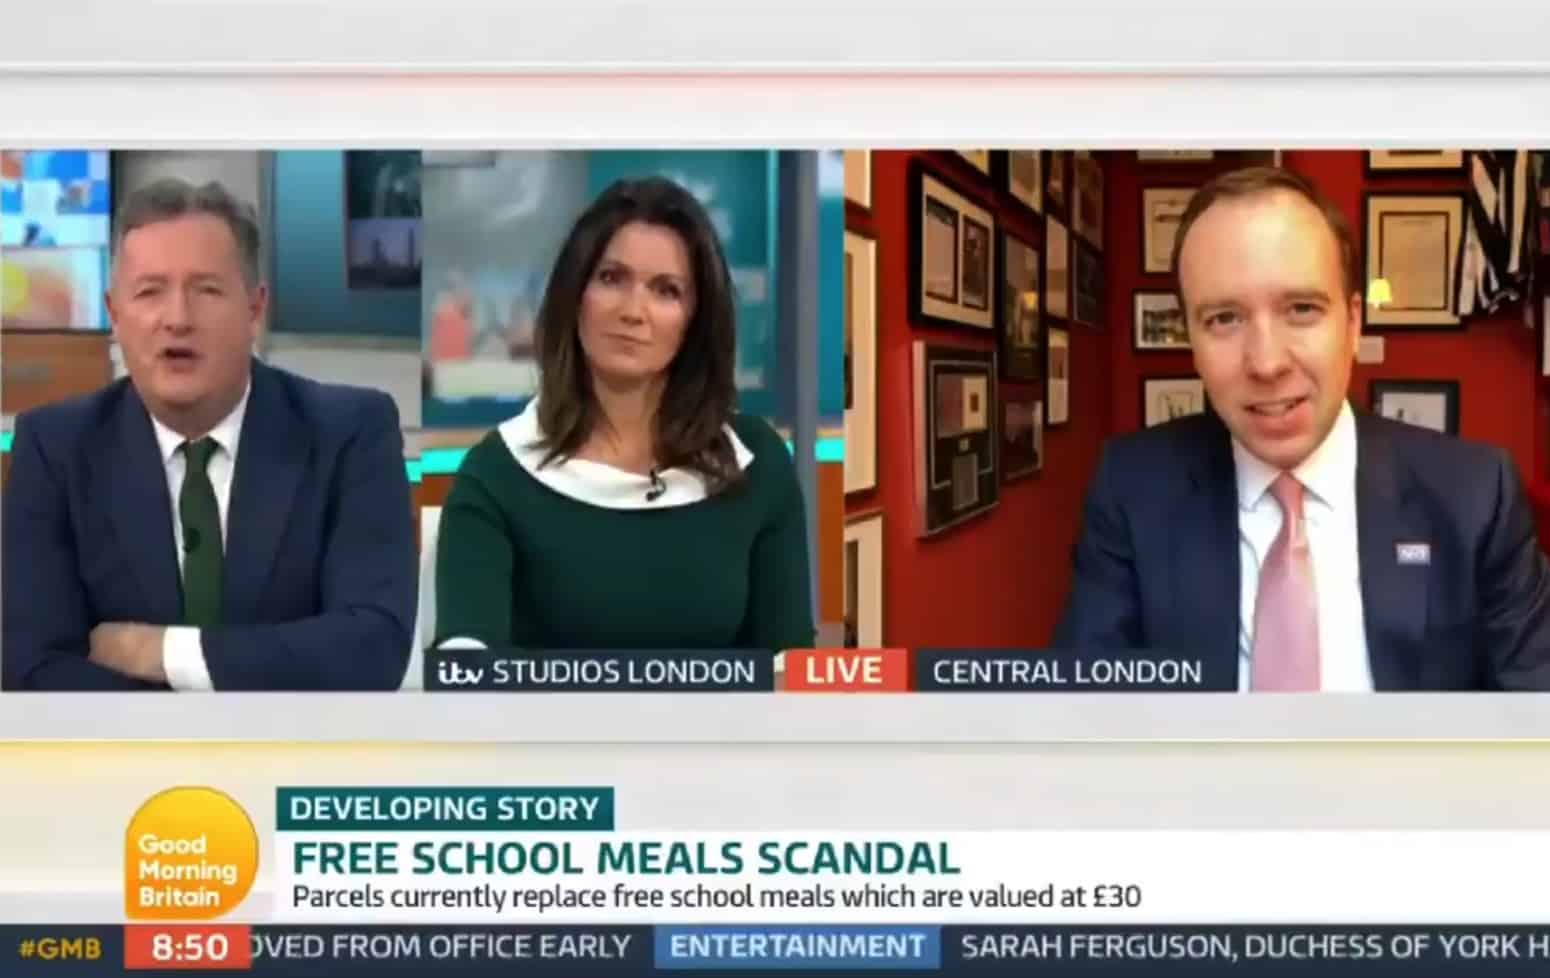 Matt Hancock made to squirm on GMB as Morgan asks: “Do you regret voting against free school meals?”